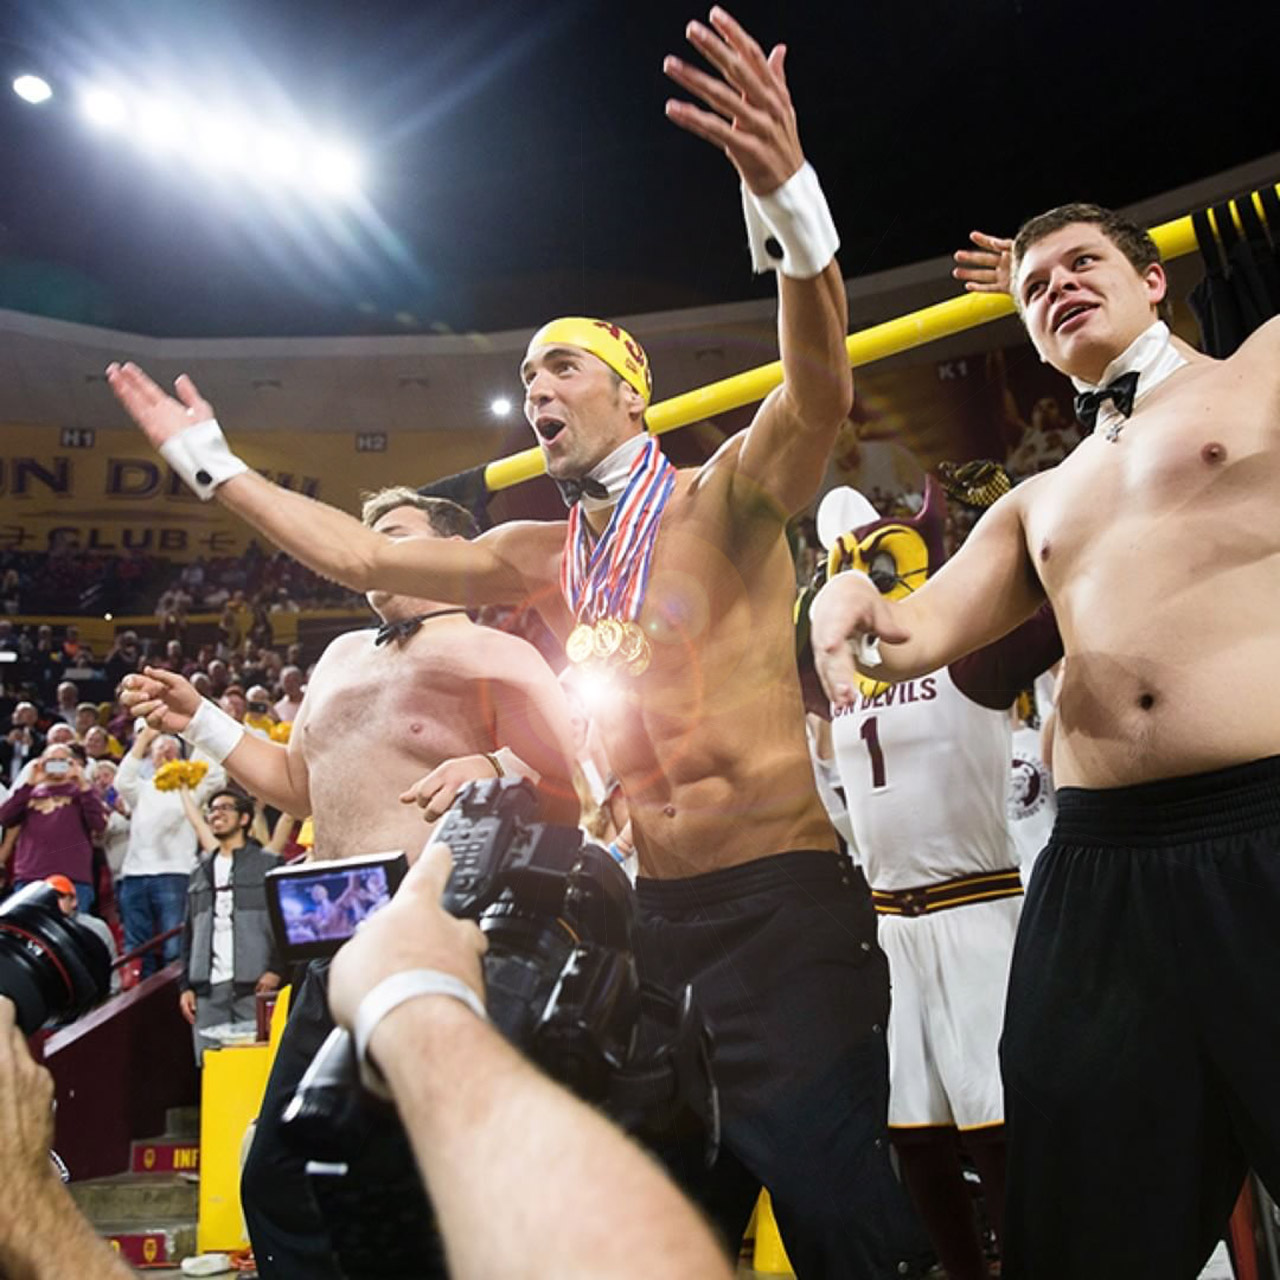 Michael Phelps partakes in ASU's "Wall of Distraction"